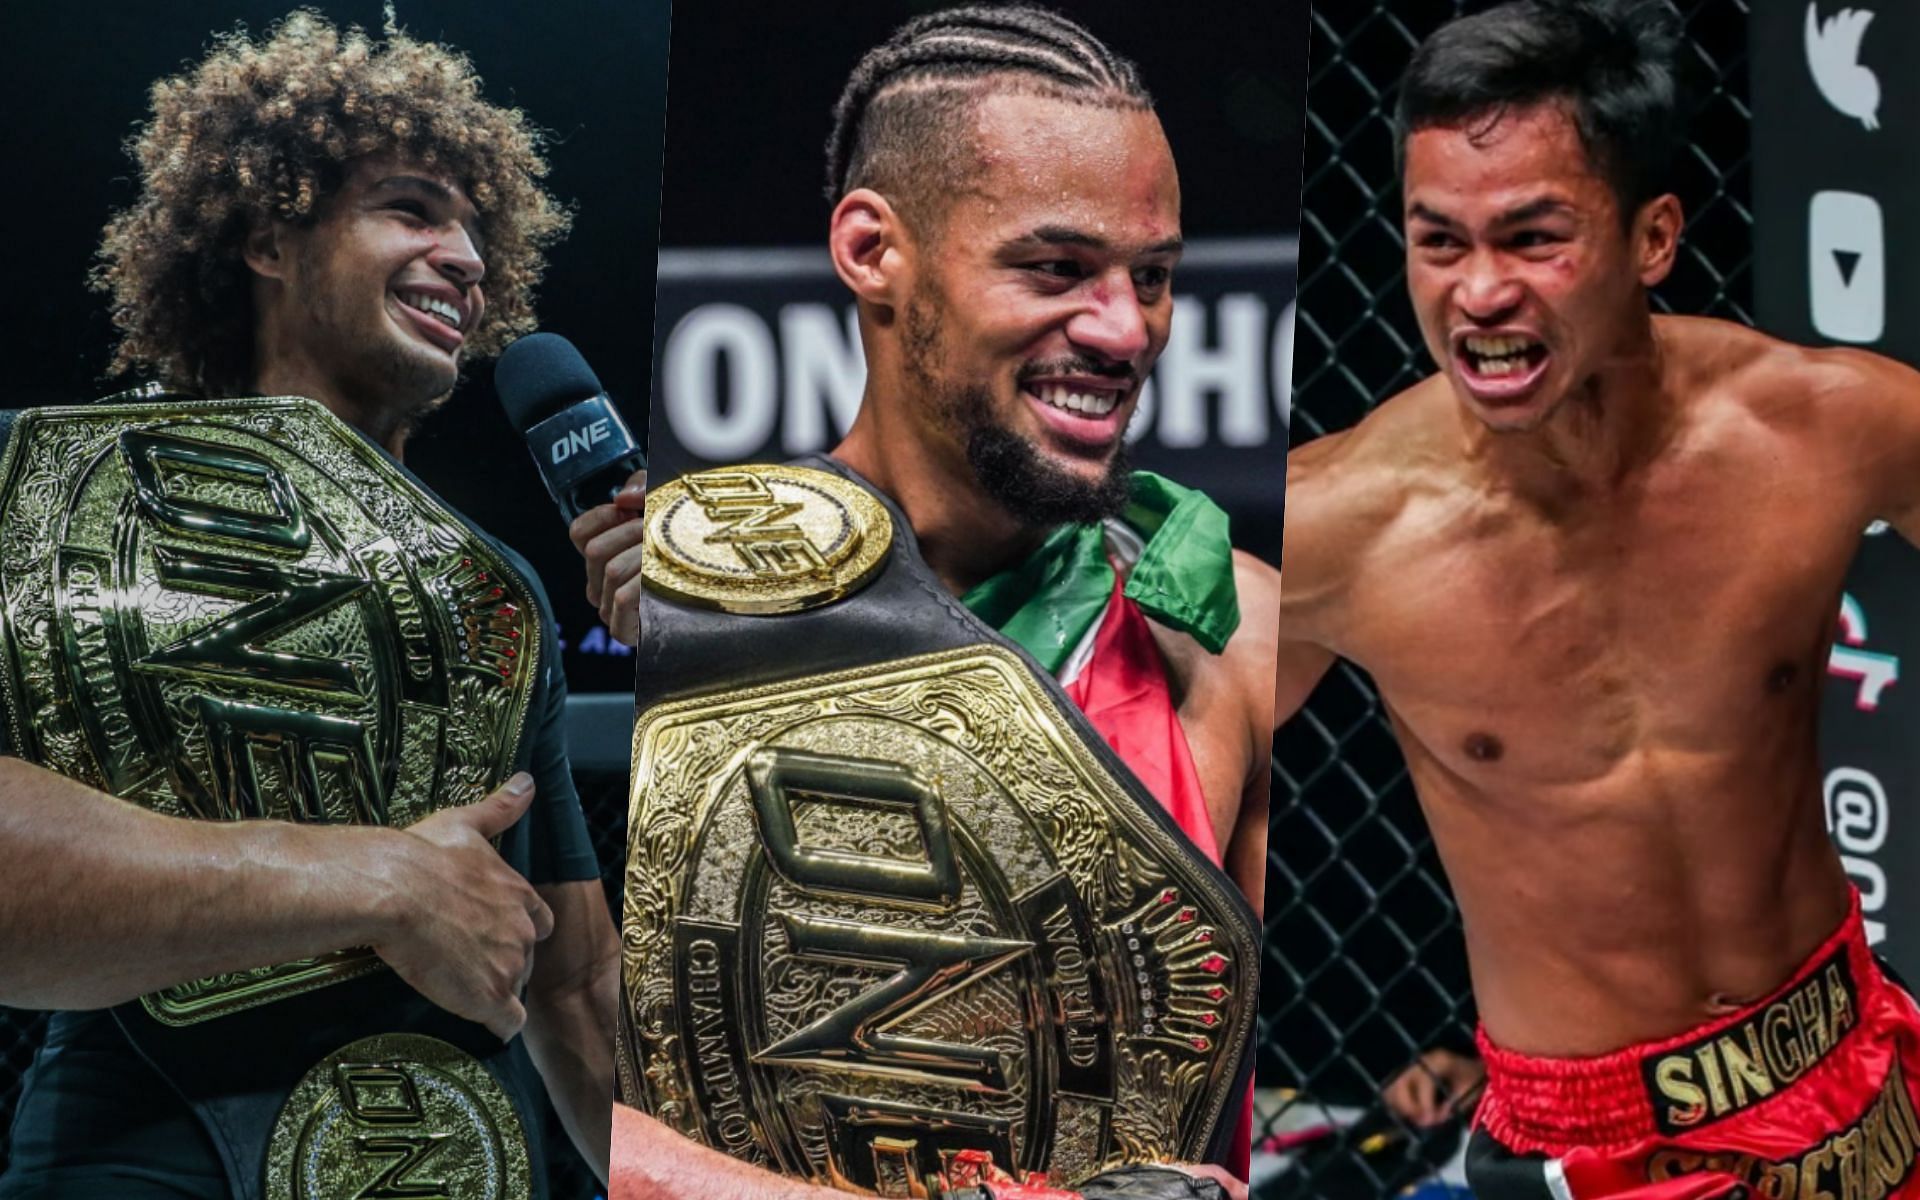 From left to right: Kade Ruotolo, Regian Eersel, Superbon | Photo by ONE Championship